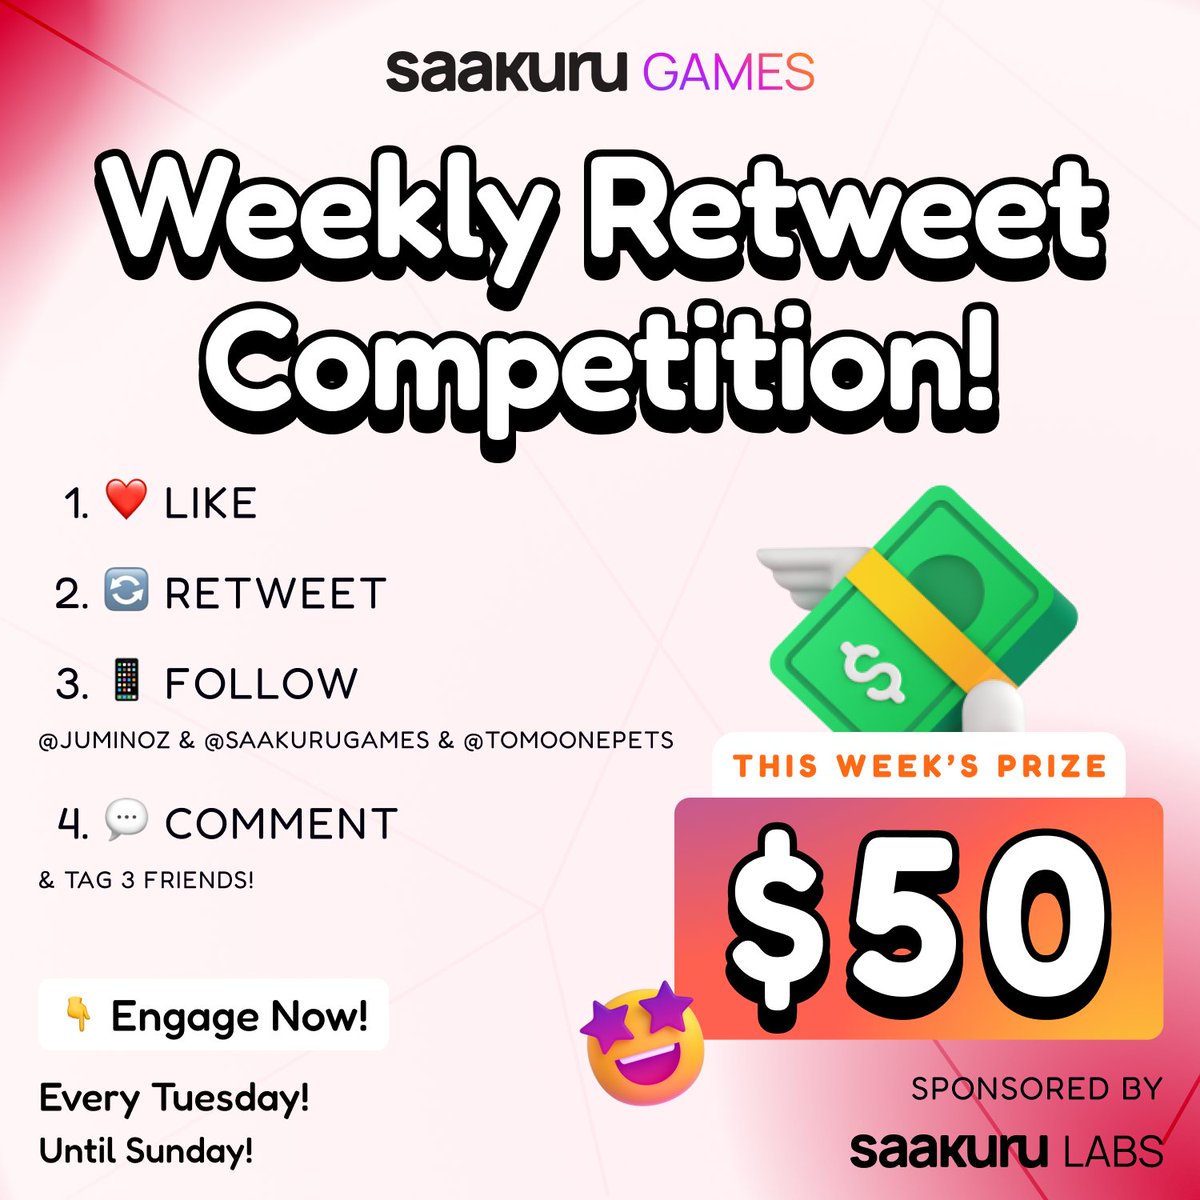 🚀$50 Weekly Retweet COMPETITION🌟
🎁Prize: $50 USDC awaits 5 Winners!💸

To enter:
1. ❤️Like this post
2. 🔄Retweet this post
3. 📱Follow @juminoz @SaakuruGames @TomoOnePets
4. 💬Comment below and tag 3 friends!

📢Winner Announcement: Next Monday!
#SaakuruGames #TomoOne